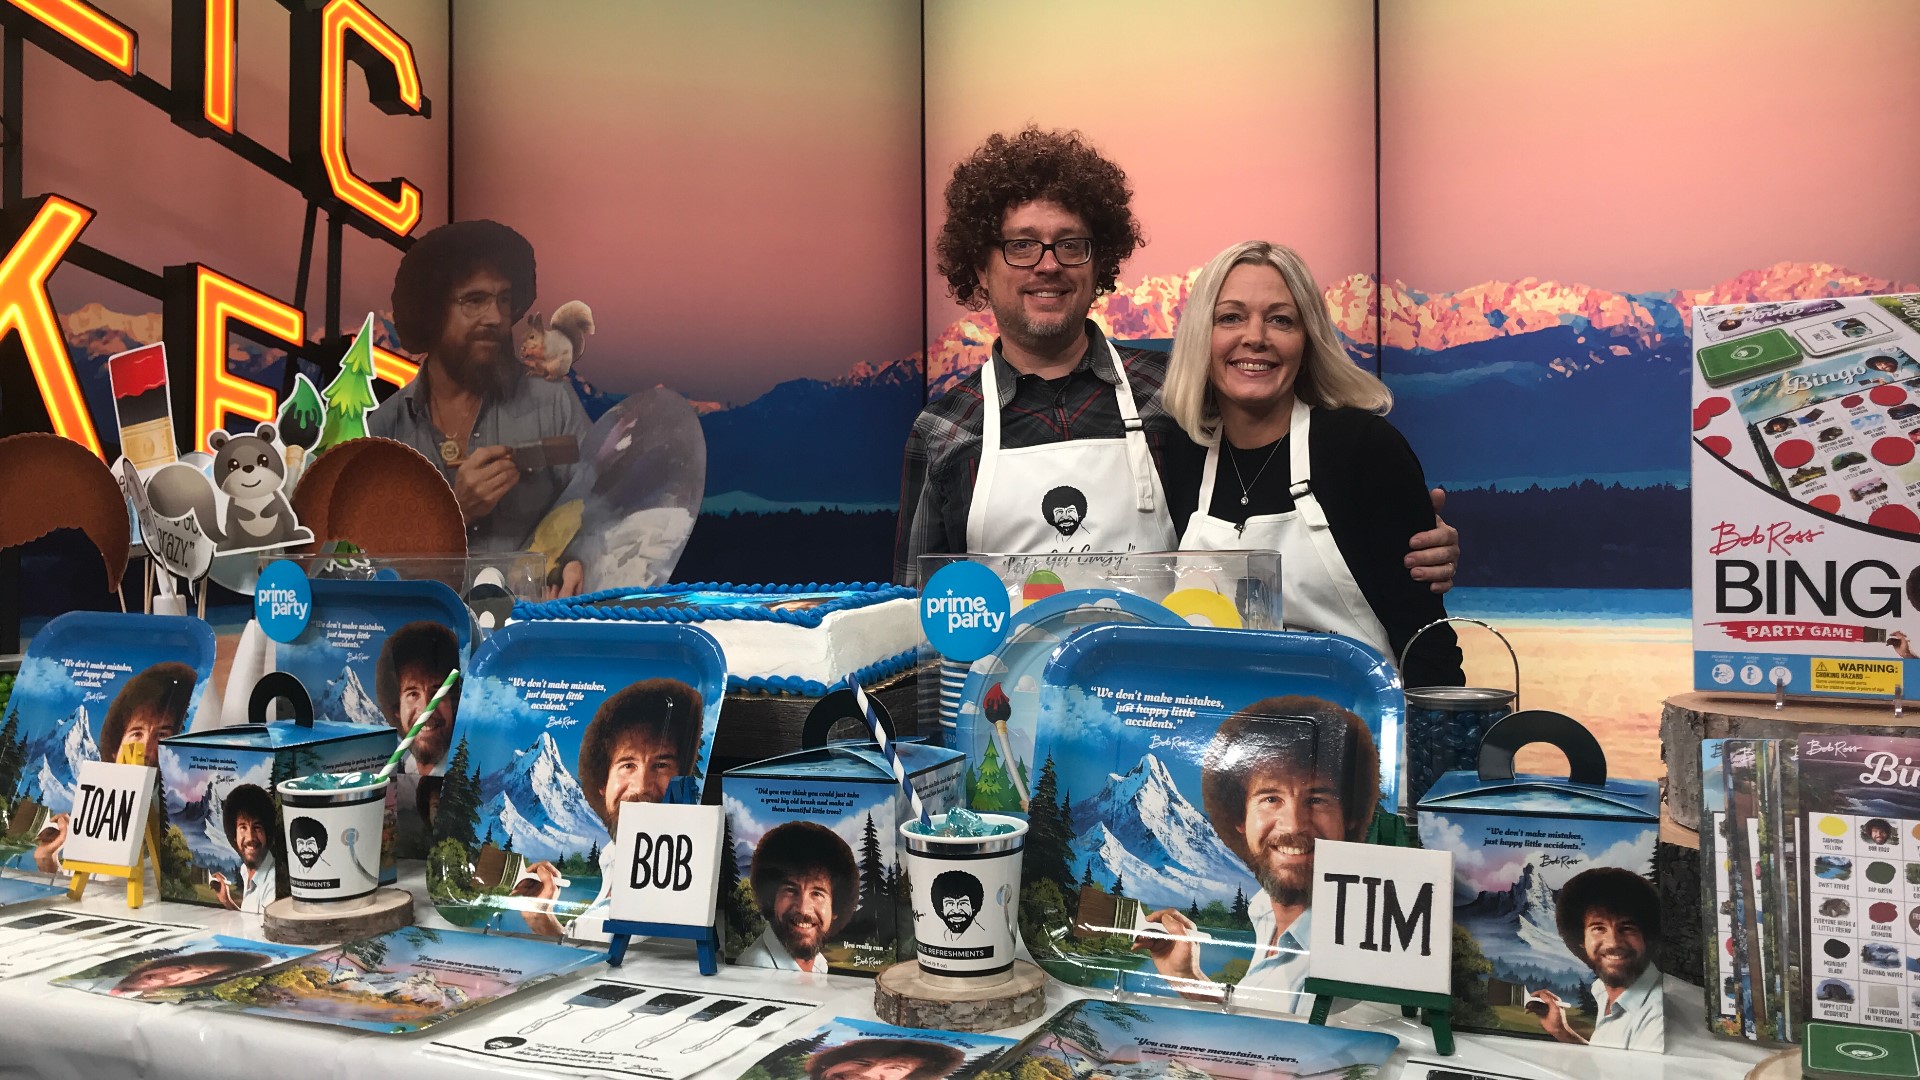 Prime Party is celebrating the pop culture icon's 77th Birthday with Bob Ross party kits so we can all pay tribute!